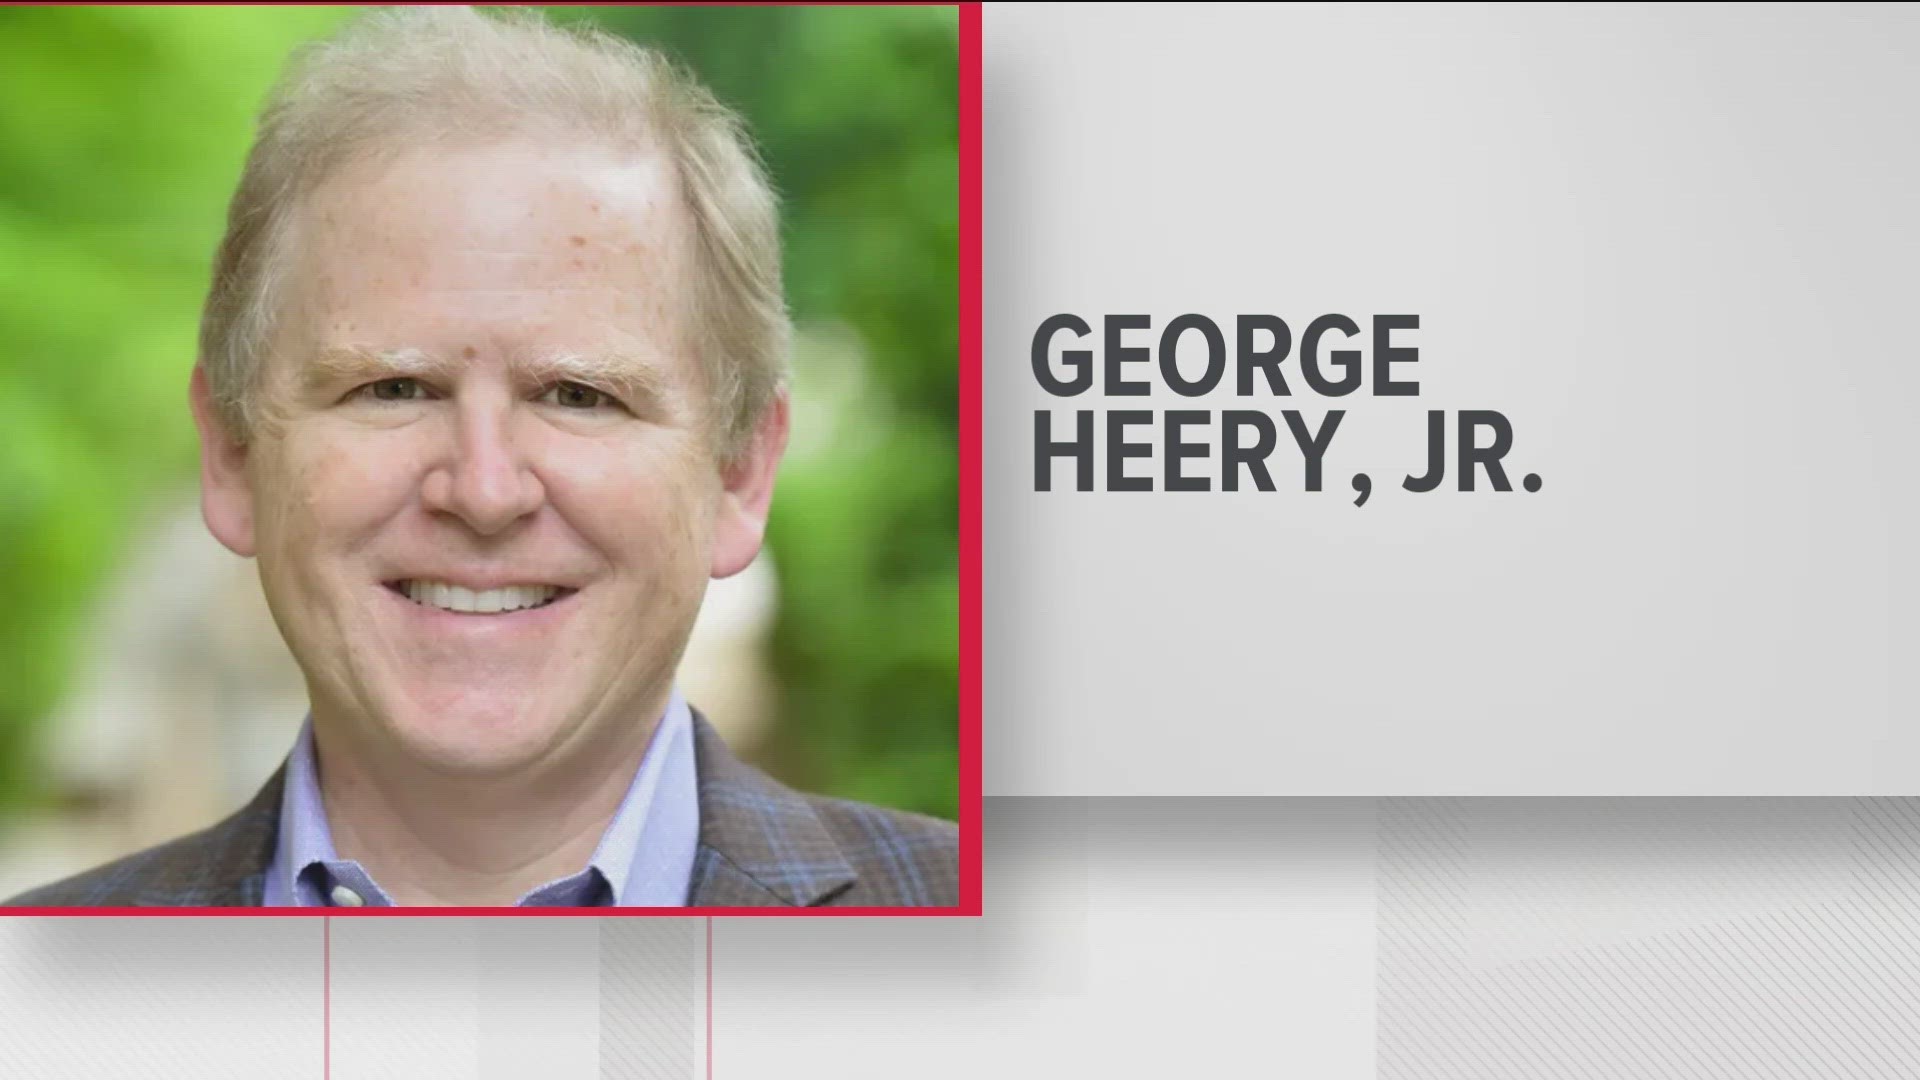 George Heery, Jr. was a respected and distinguished real estate agent who worked for Atlanta Fine Homes Sotheby's International Realty.